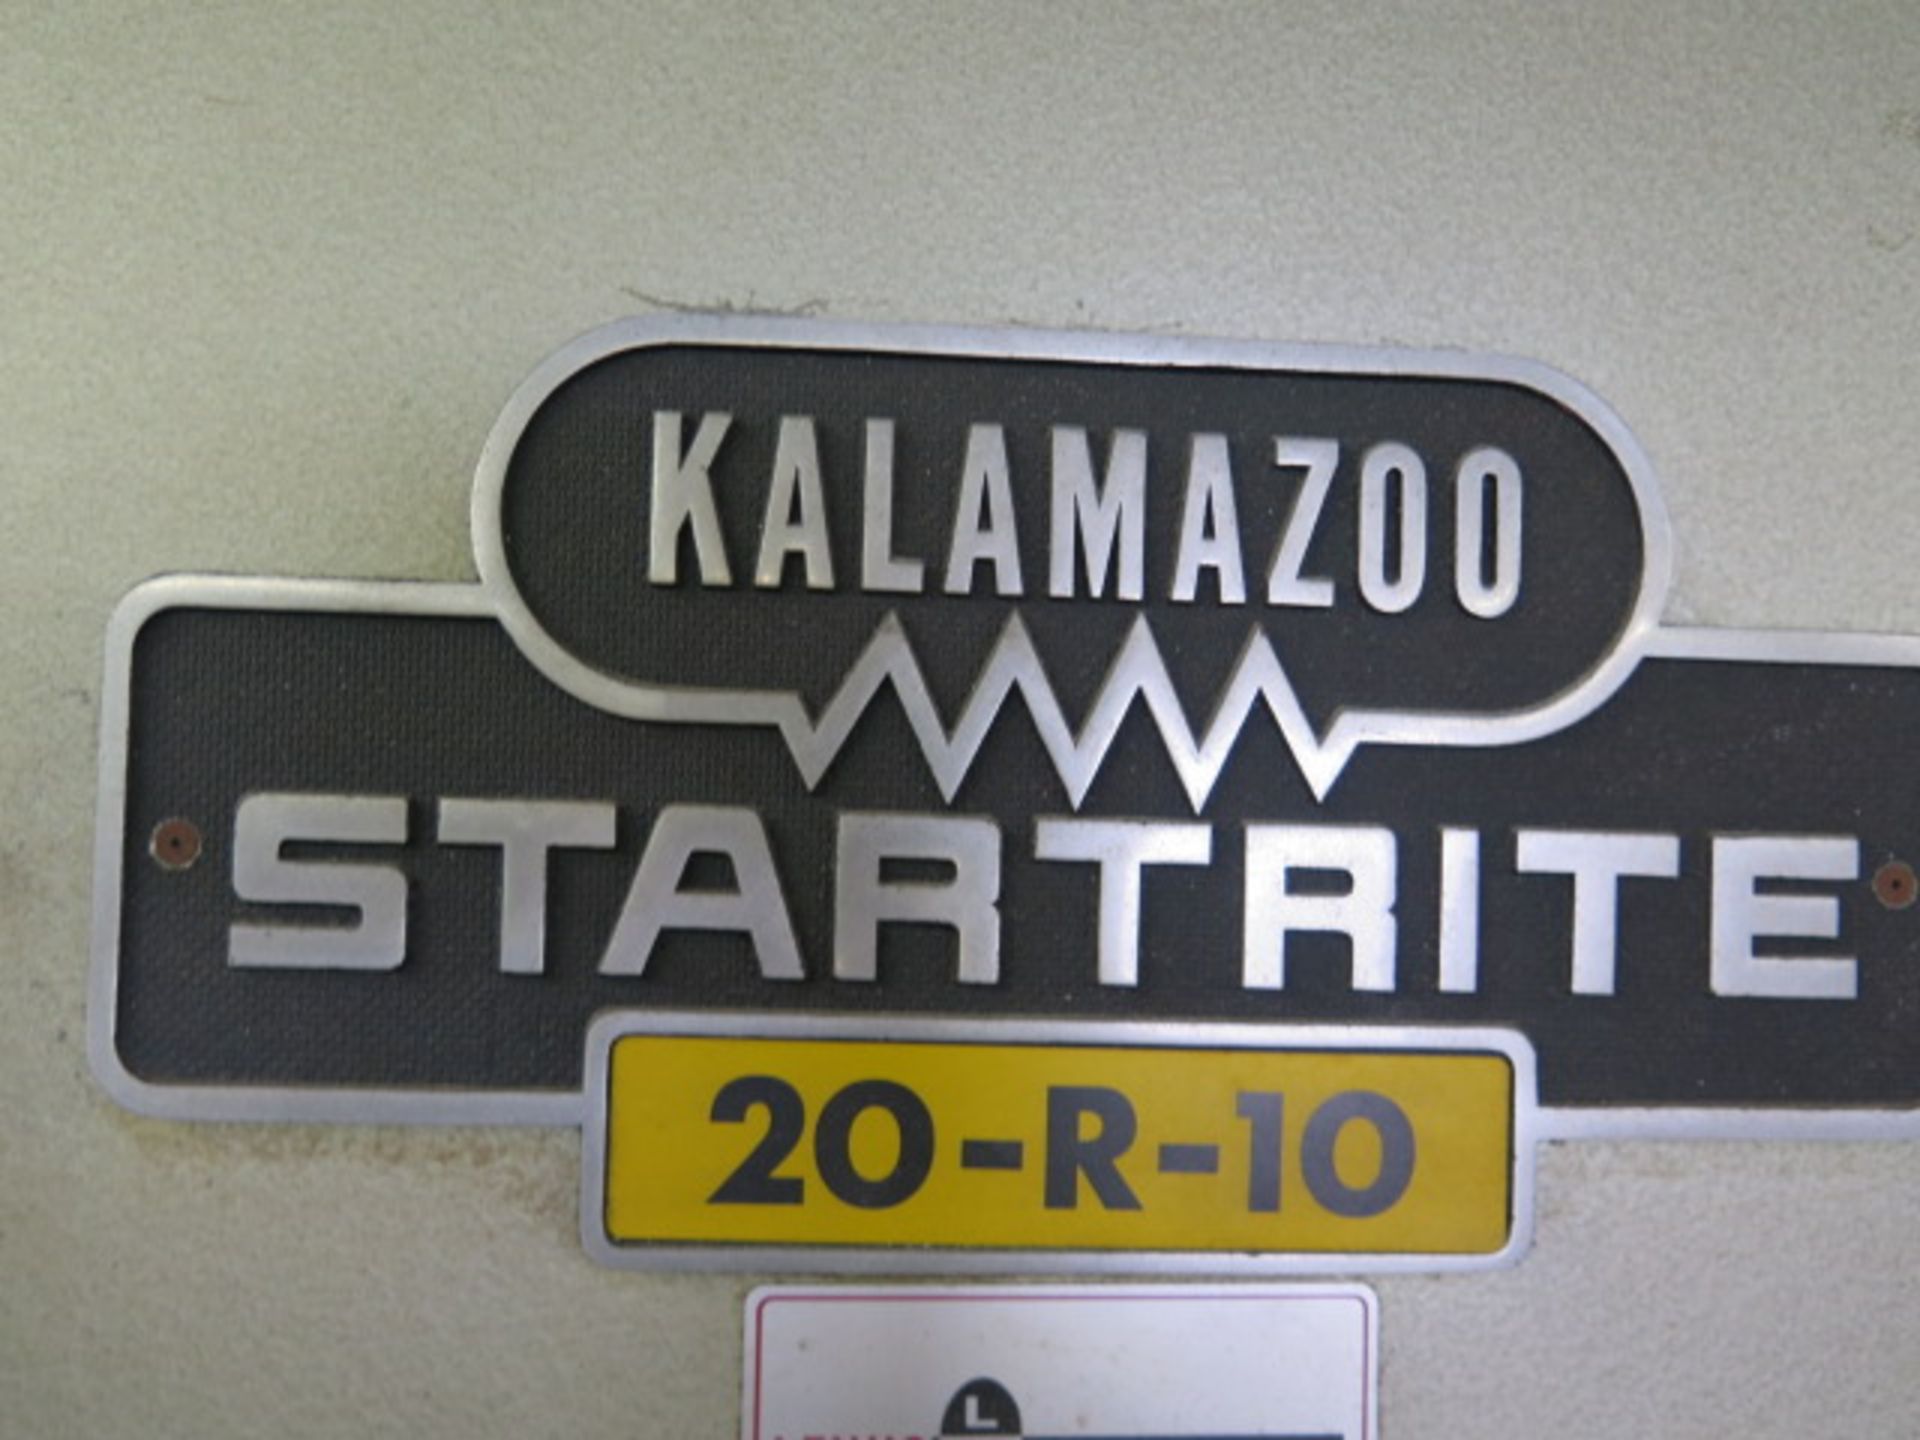 Kalamazoo Startrite 20-R-10 20" Vertical Band Saw w/ Blade Welder (SOLD AS-IS - NO WARRANTY) - Image 9 of 9